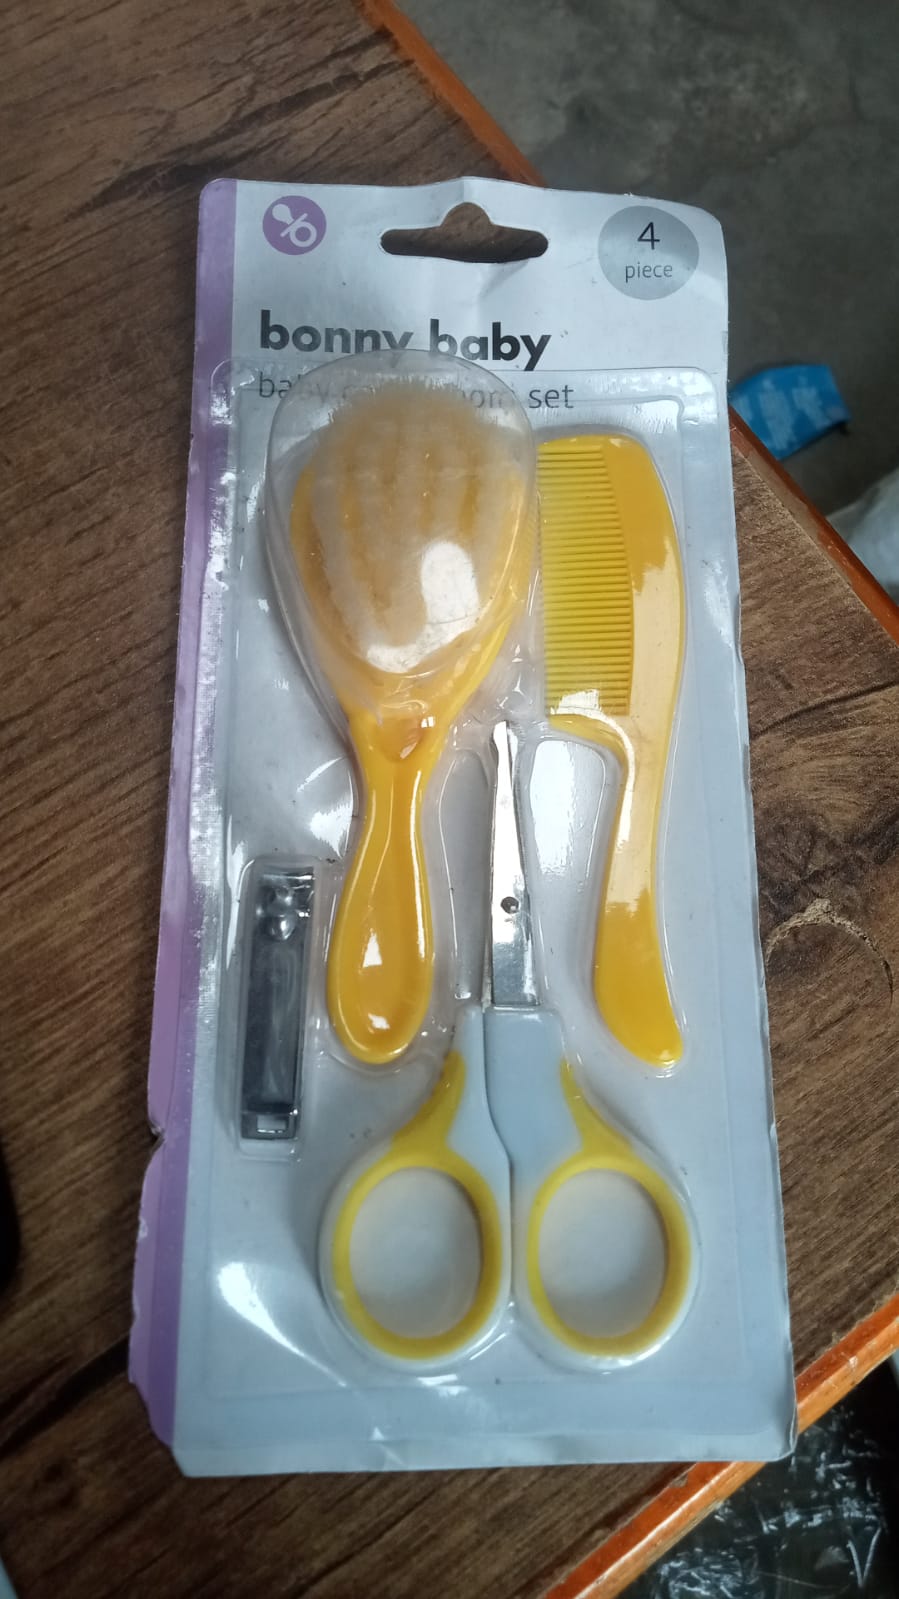 Born Baby Health Care Kit Baby Health Care And Grooming Kit 4 in 1 Nail Clipper Brush Comb Scissors Baby Safety Care Kit